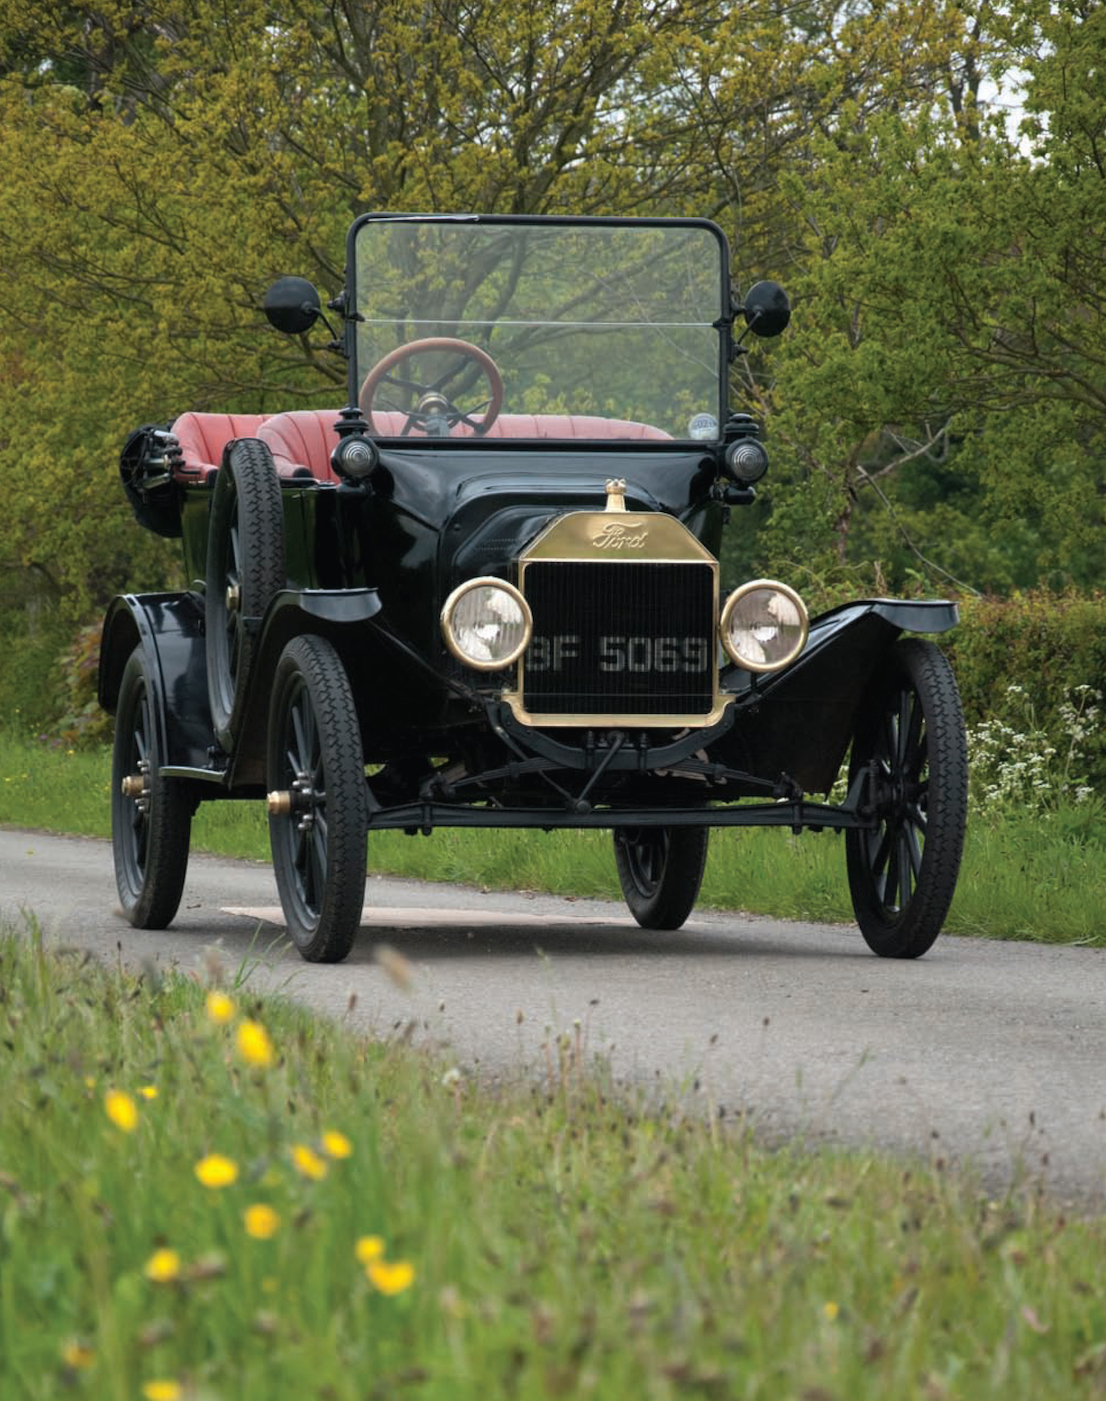 1915 Ford Model T tourer owned by Michael Flather.